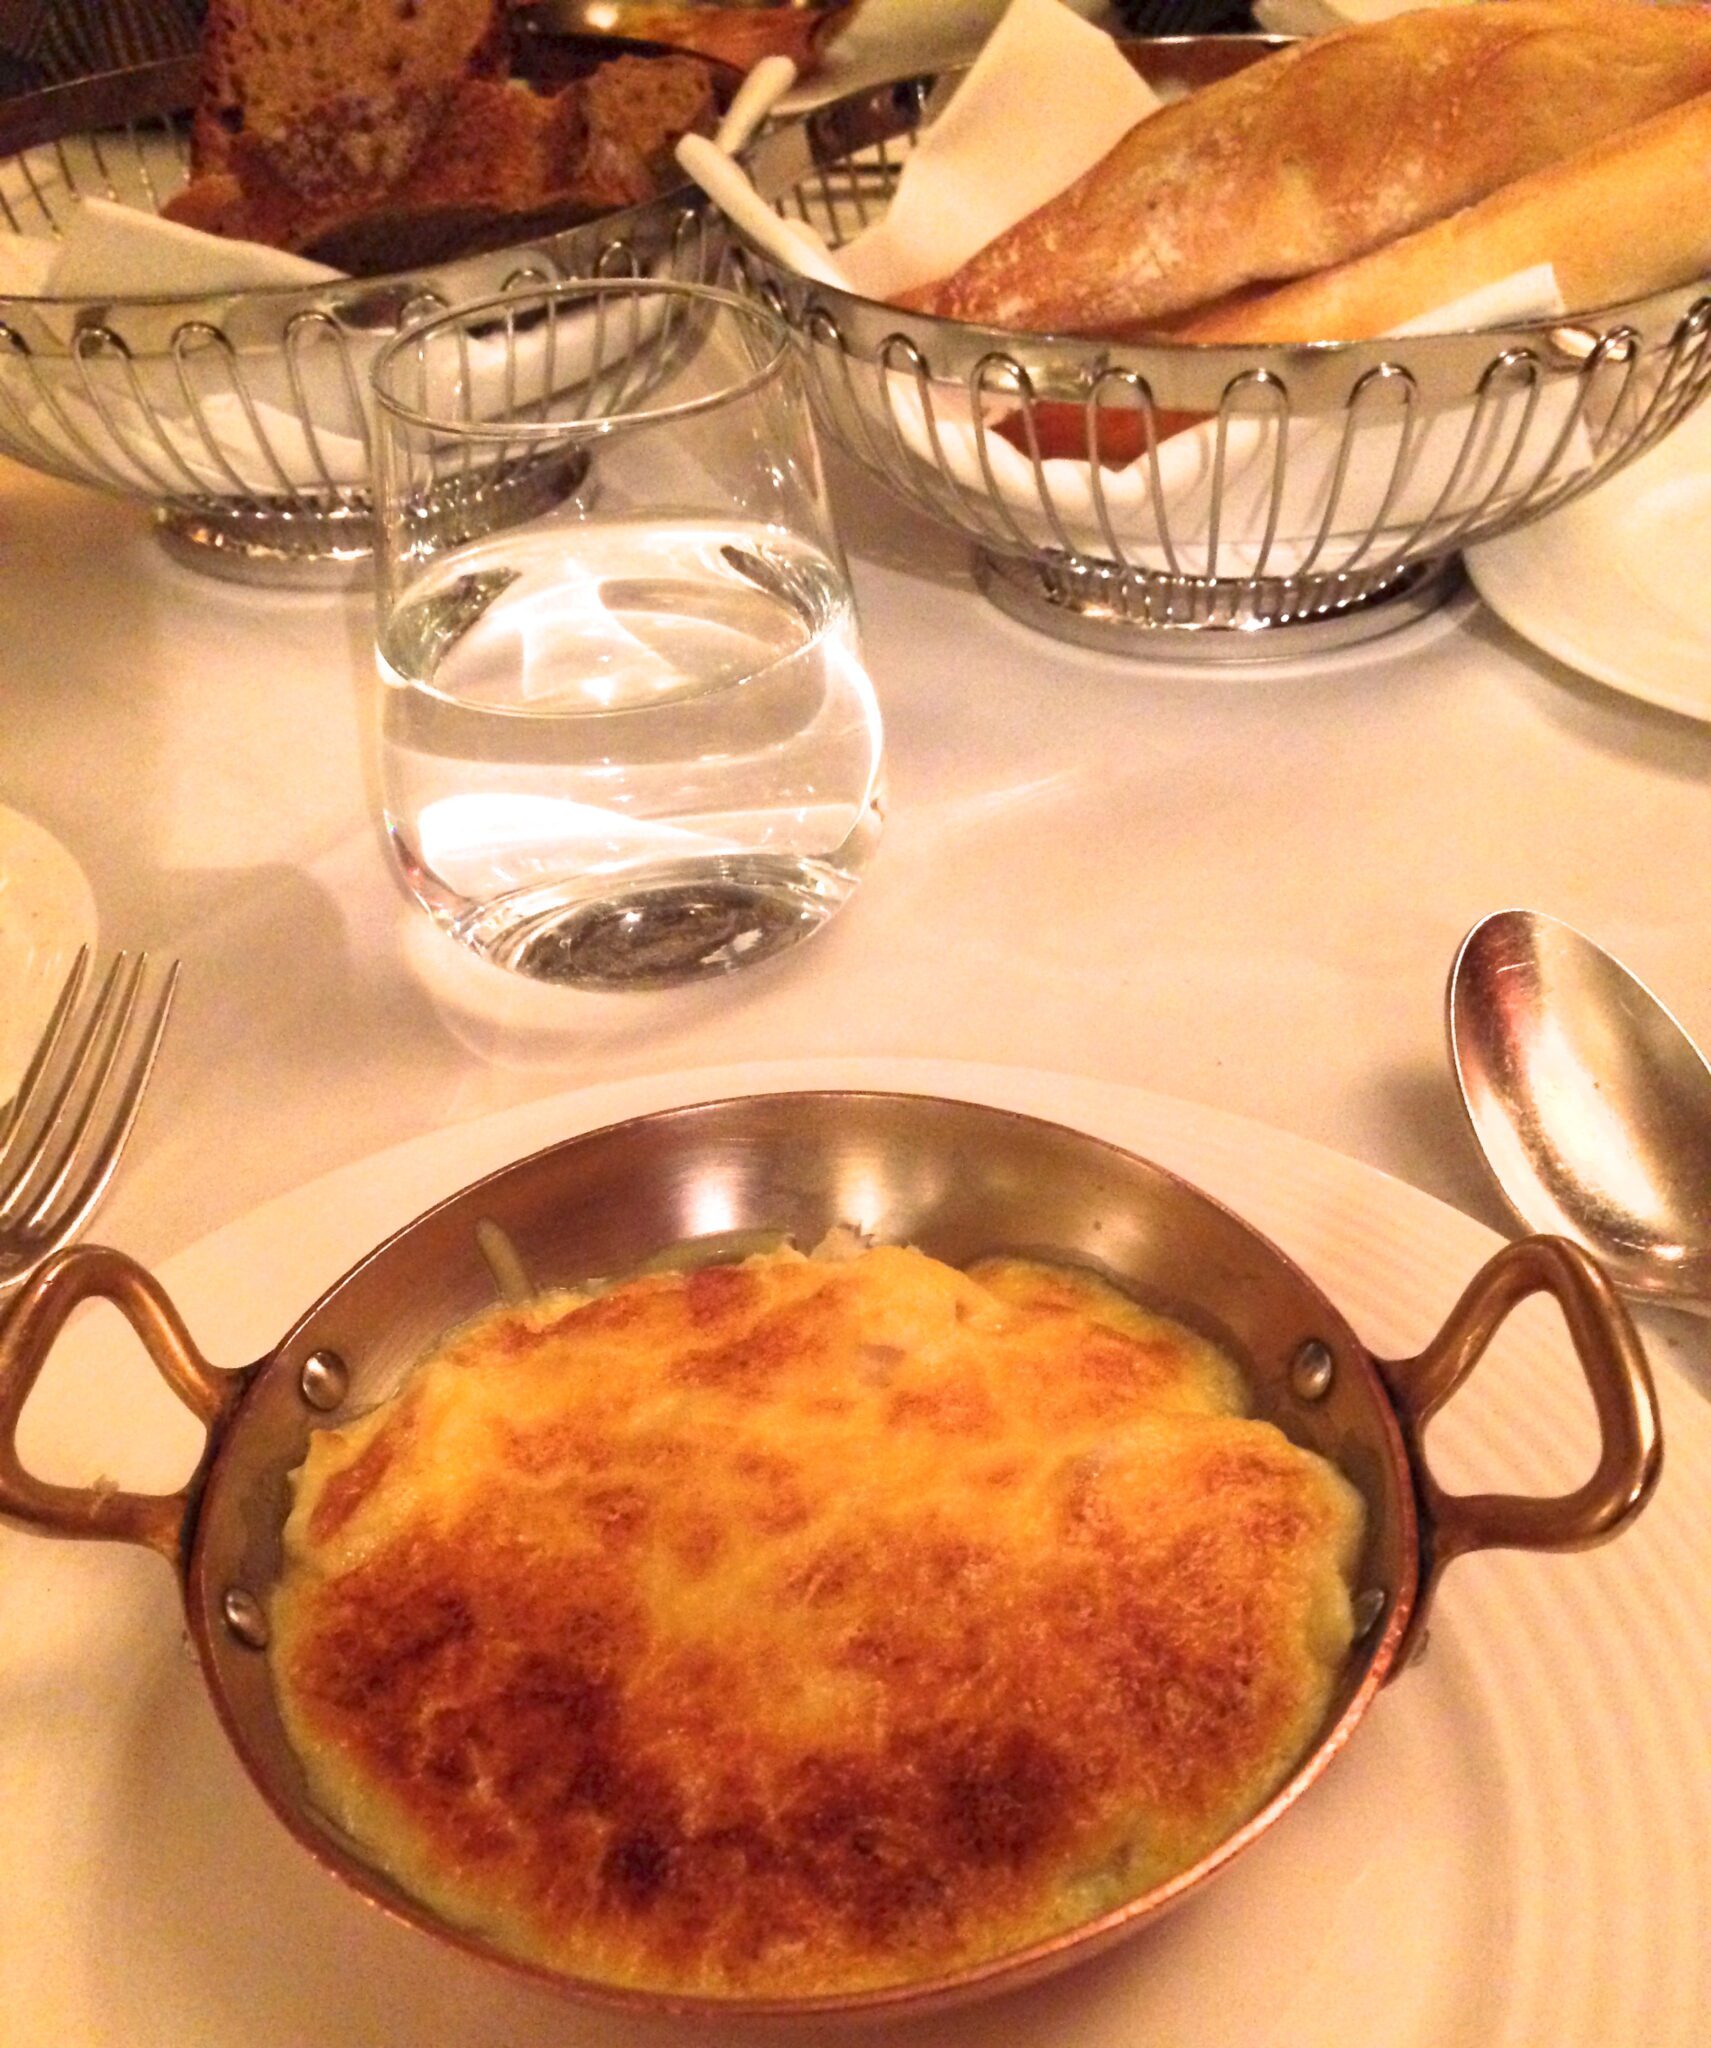 The signature 'Omelette Arnold Bennett.' This fluffy omelette, with smoked haddock, hollandaise sauce and cheese, was invented at The Savoy in the 1920s and named after the writer and critic Arnold Bennett. The chefs perfected it to his taste while he was staying at the hotel, writing a novel.